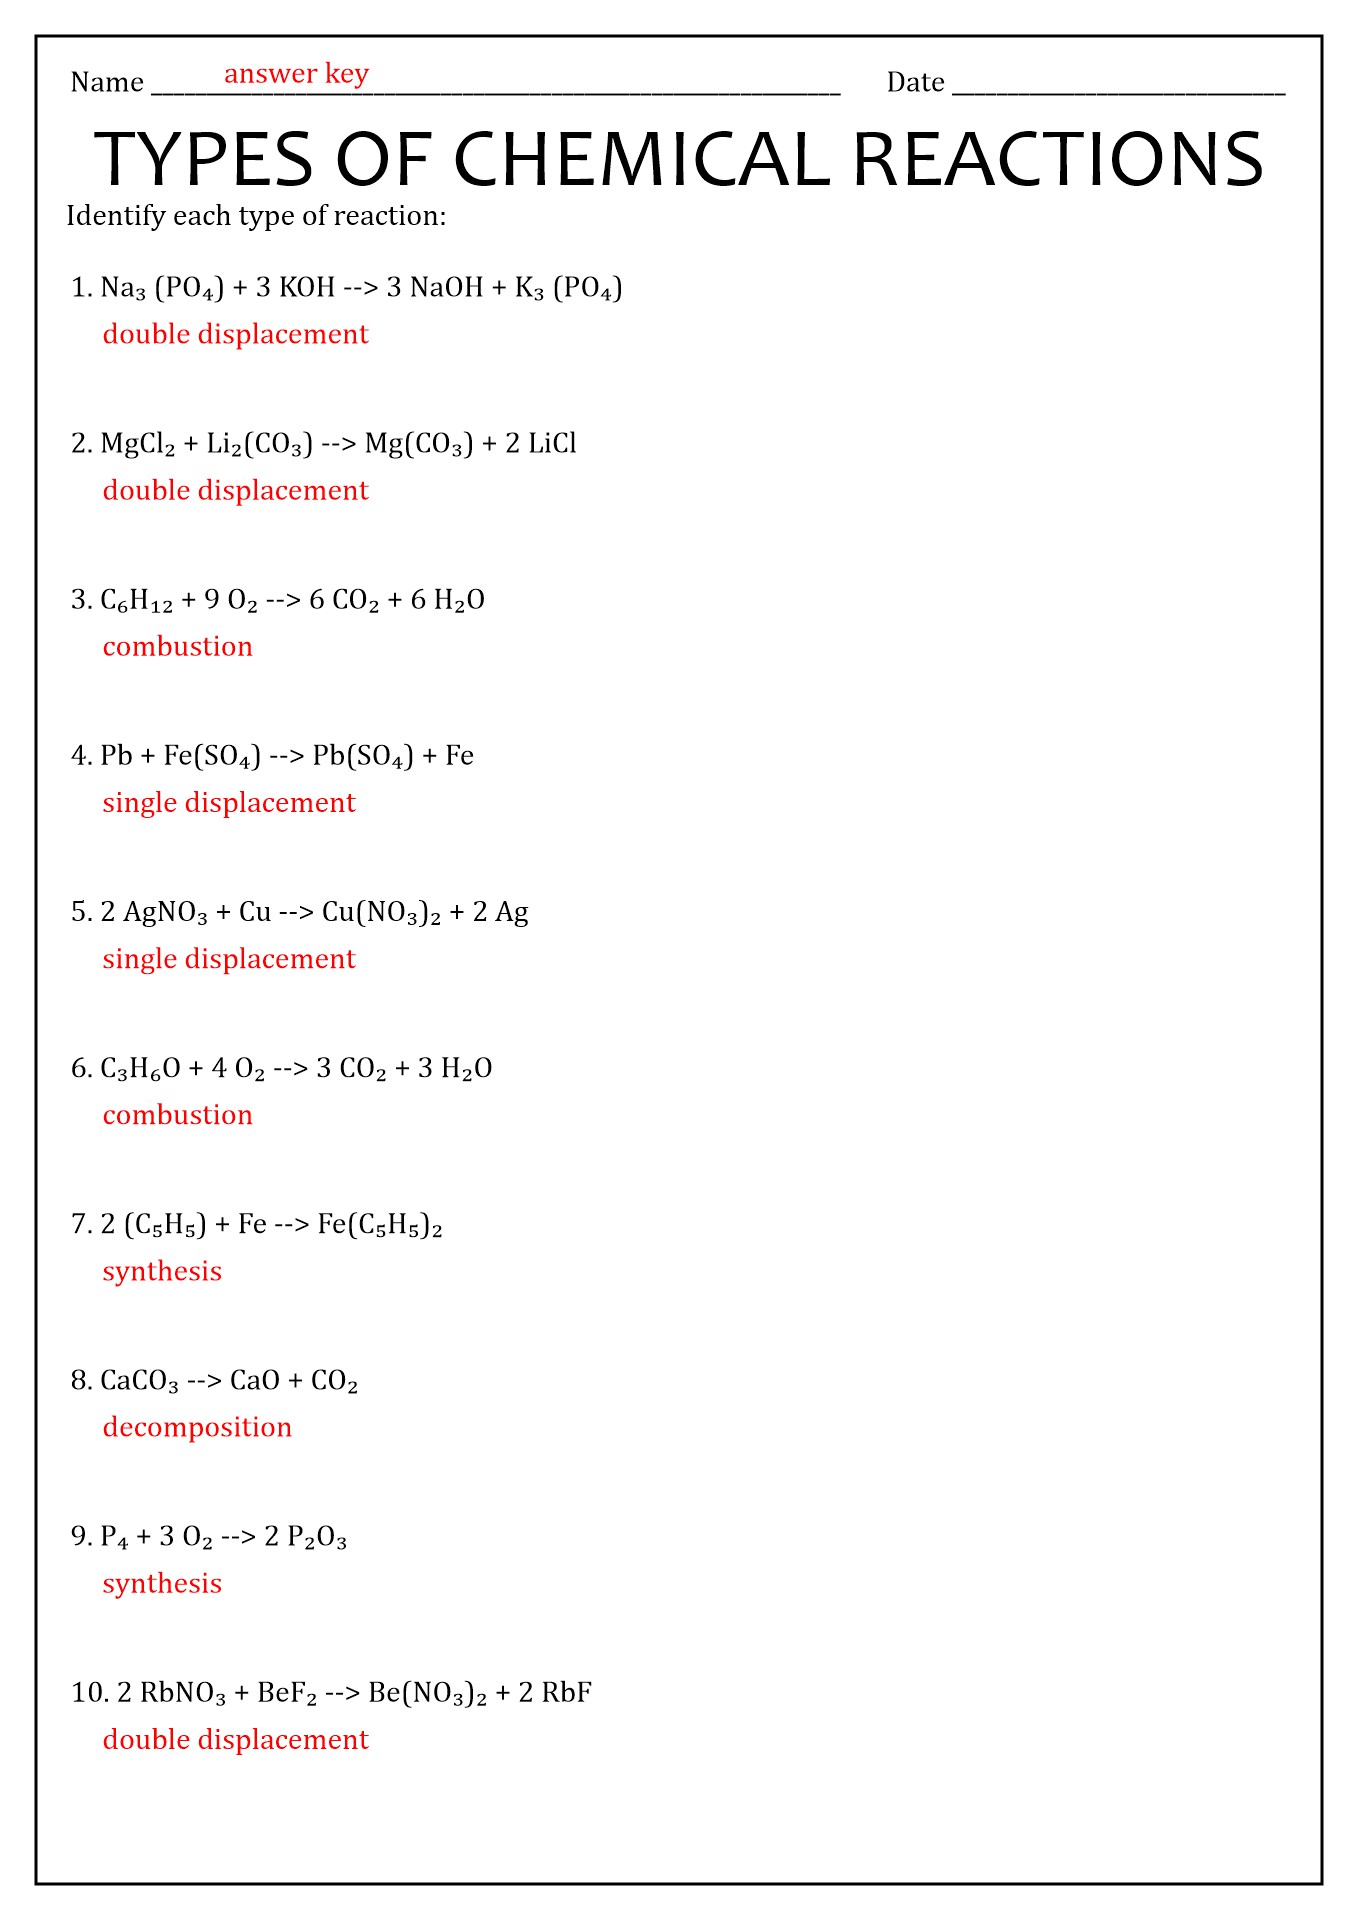 16 Best Images of Types Chemical Reactions Worksheets Answers  Types of Chemical Reactions 